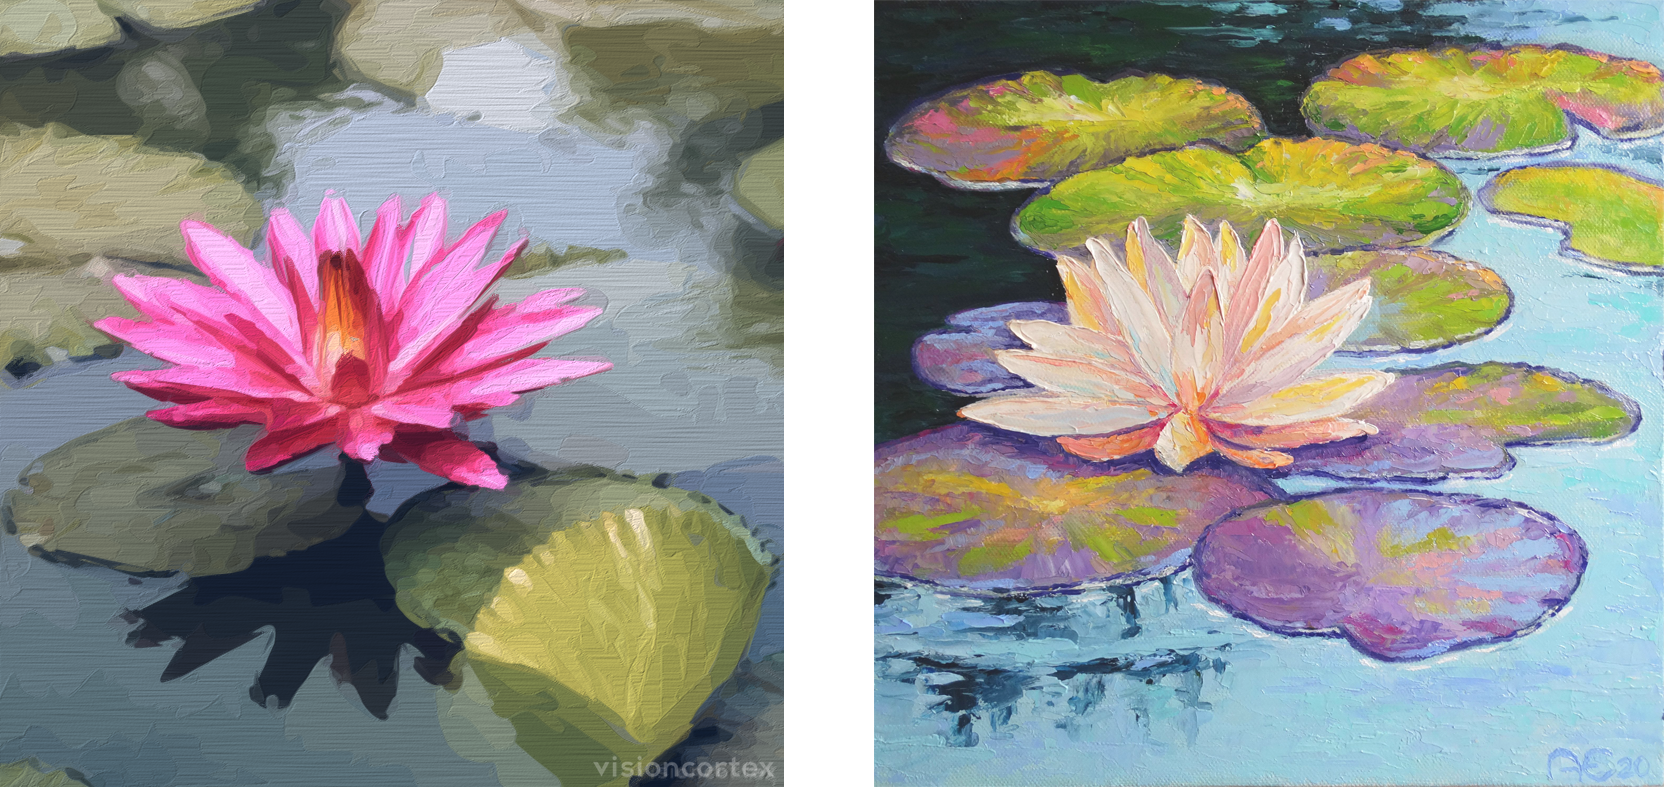 Left: Artwork generated by Impression; Right: Water Lilies Painting by Claude Monet